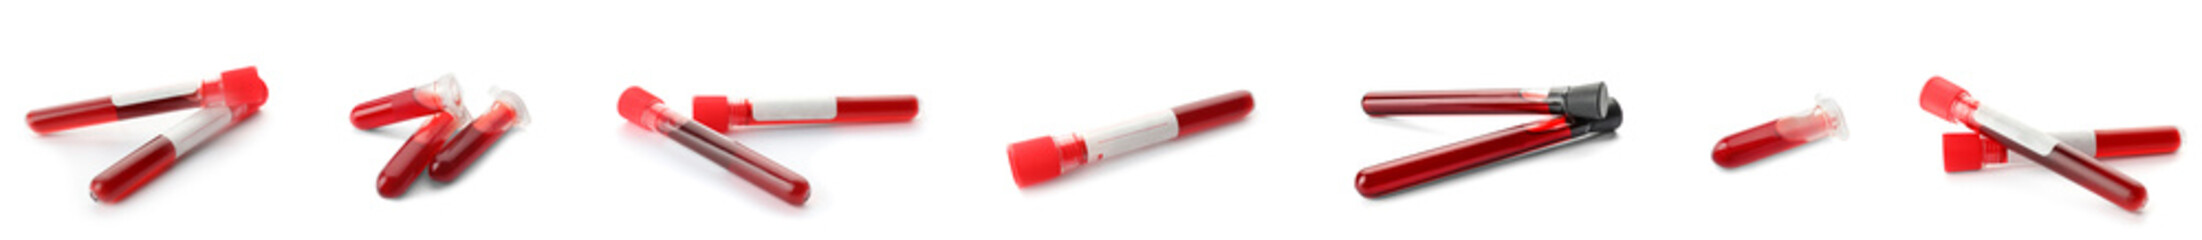 Set of test tubes with blood samples on white background